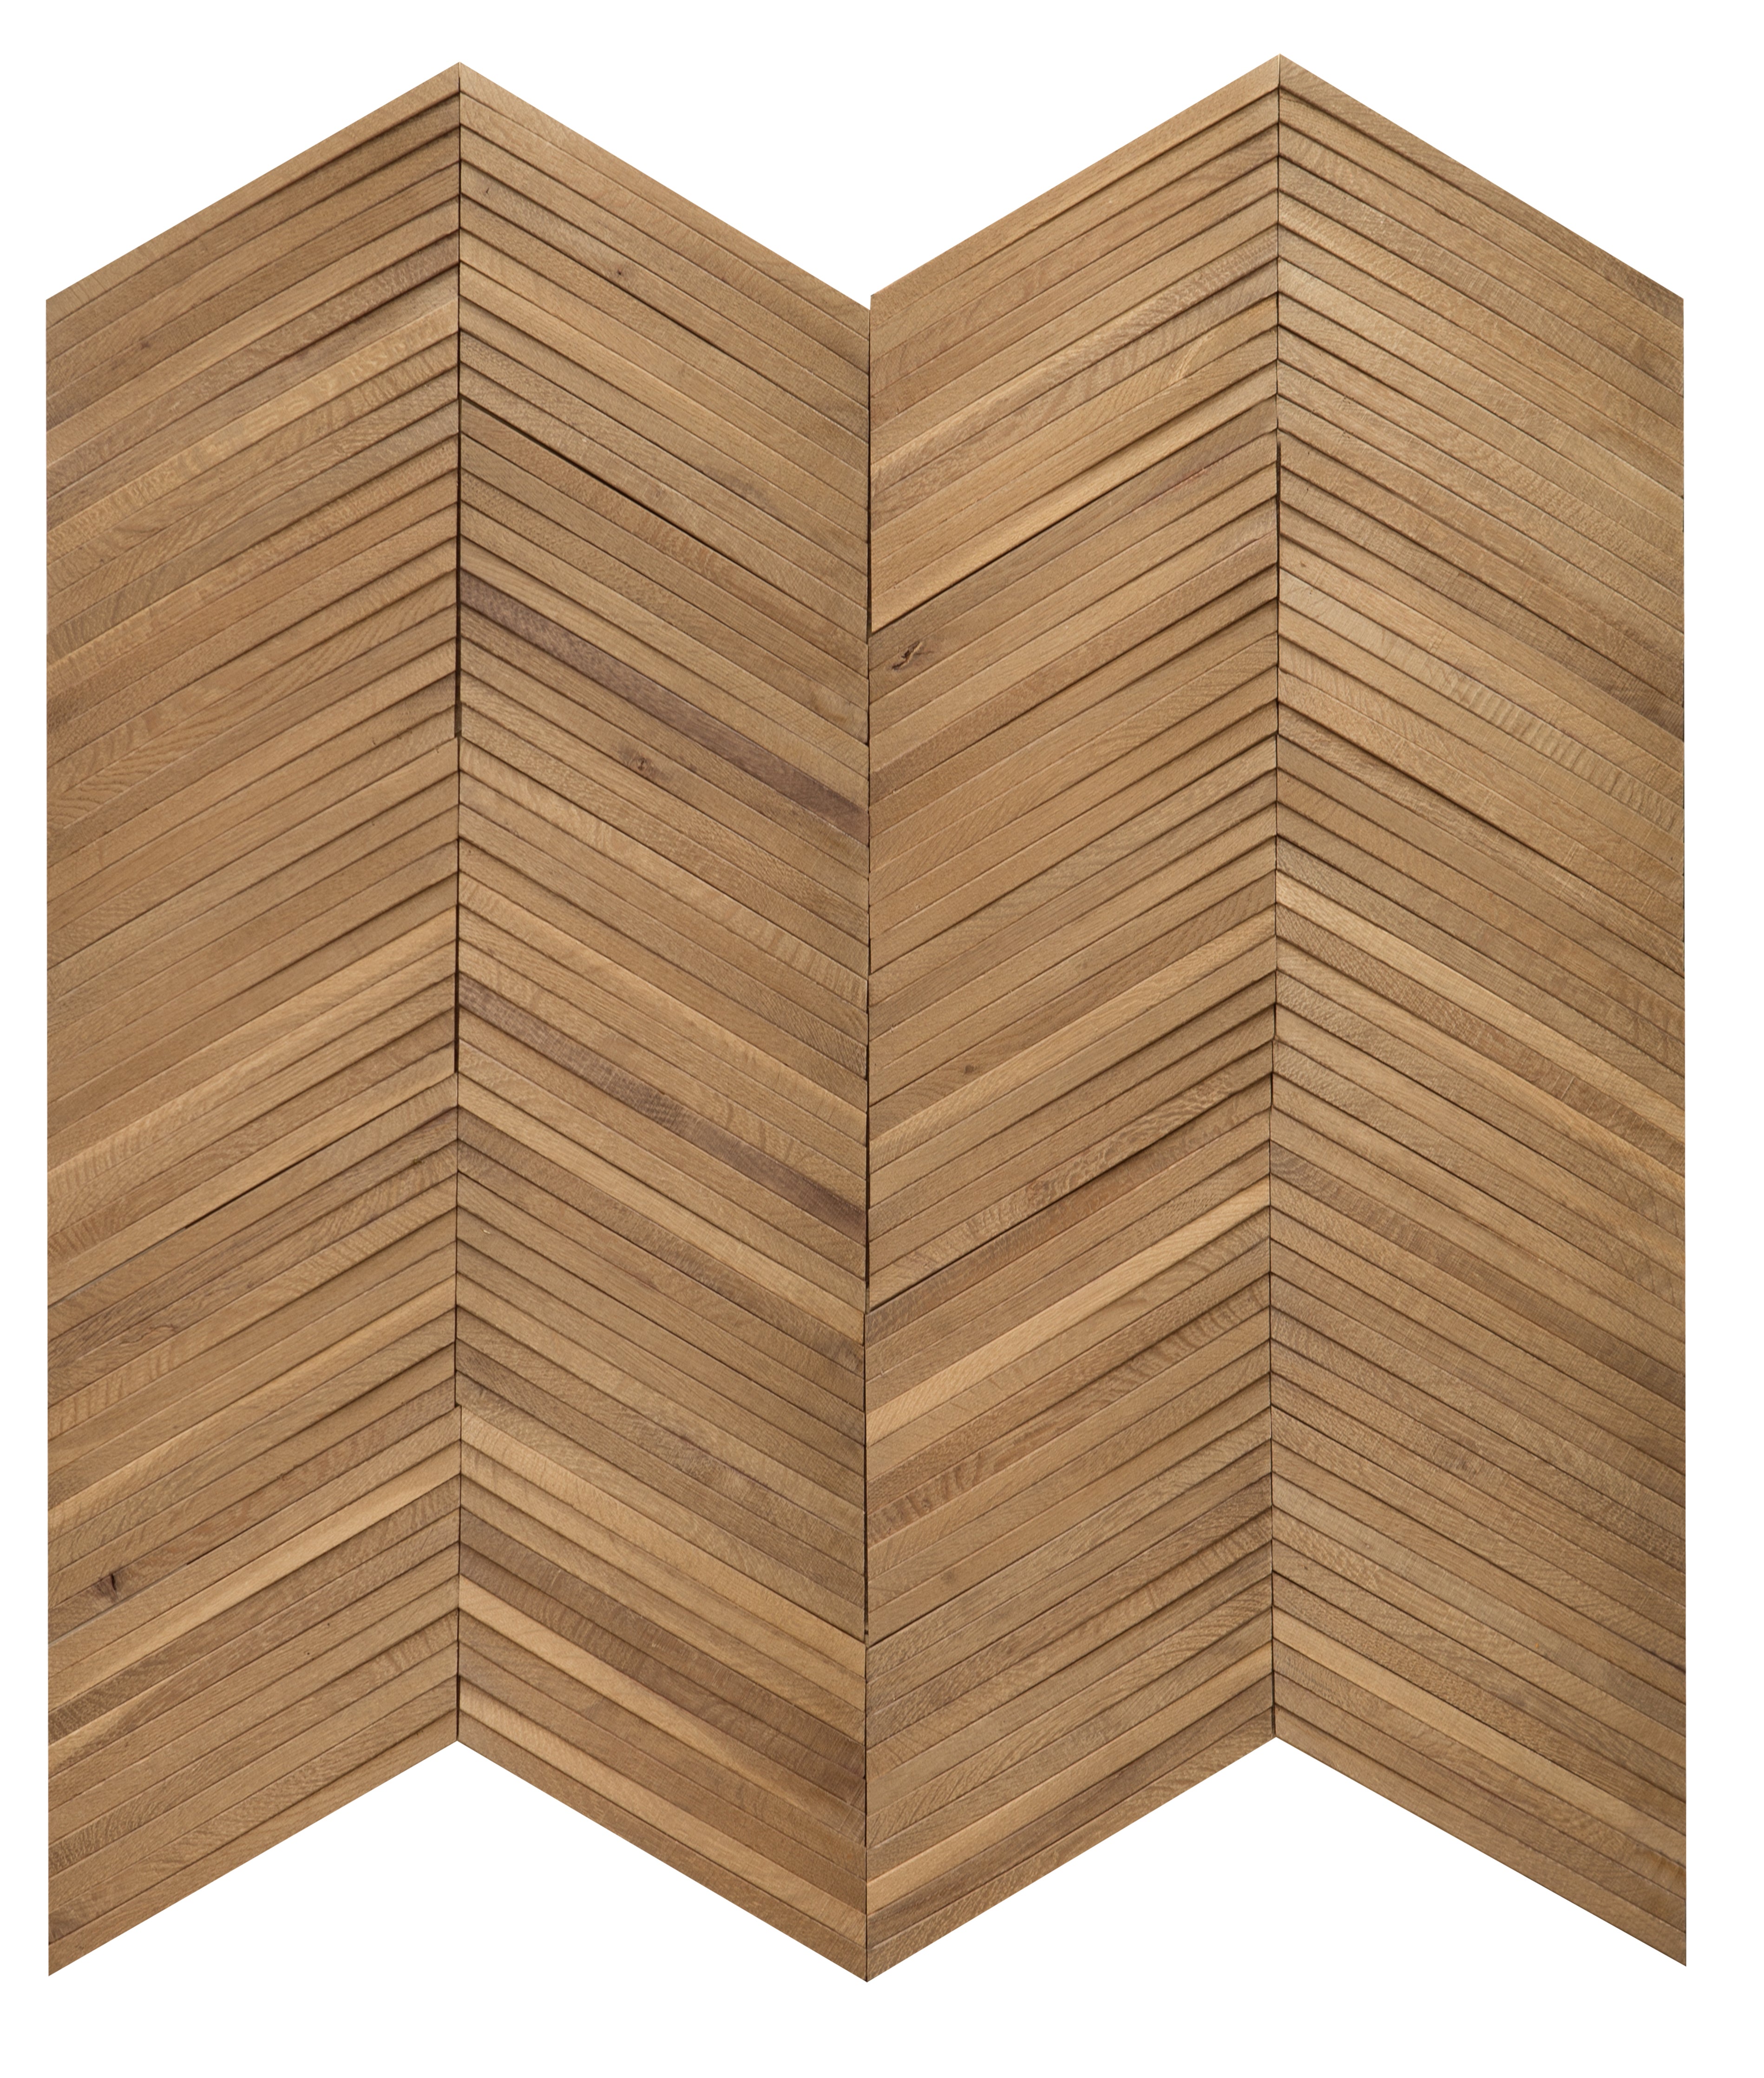 duchateau inceptiv ark chevron sand oak three dimensional wall natural wood panel lacquer for interior use distributed by surface group international